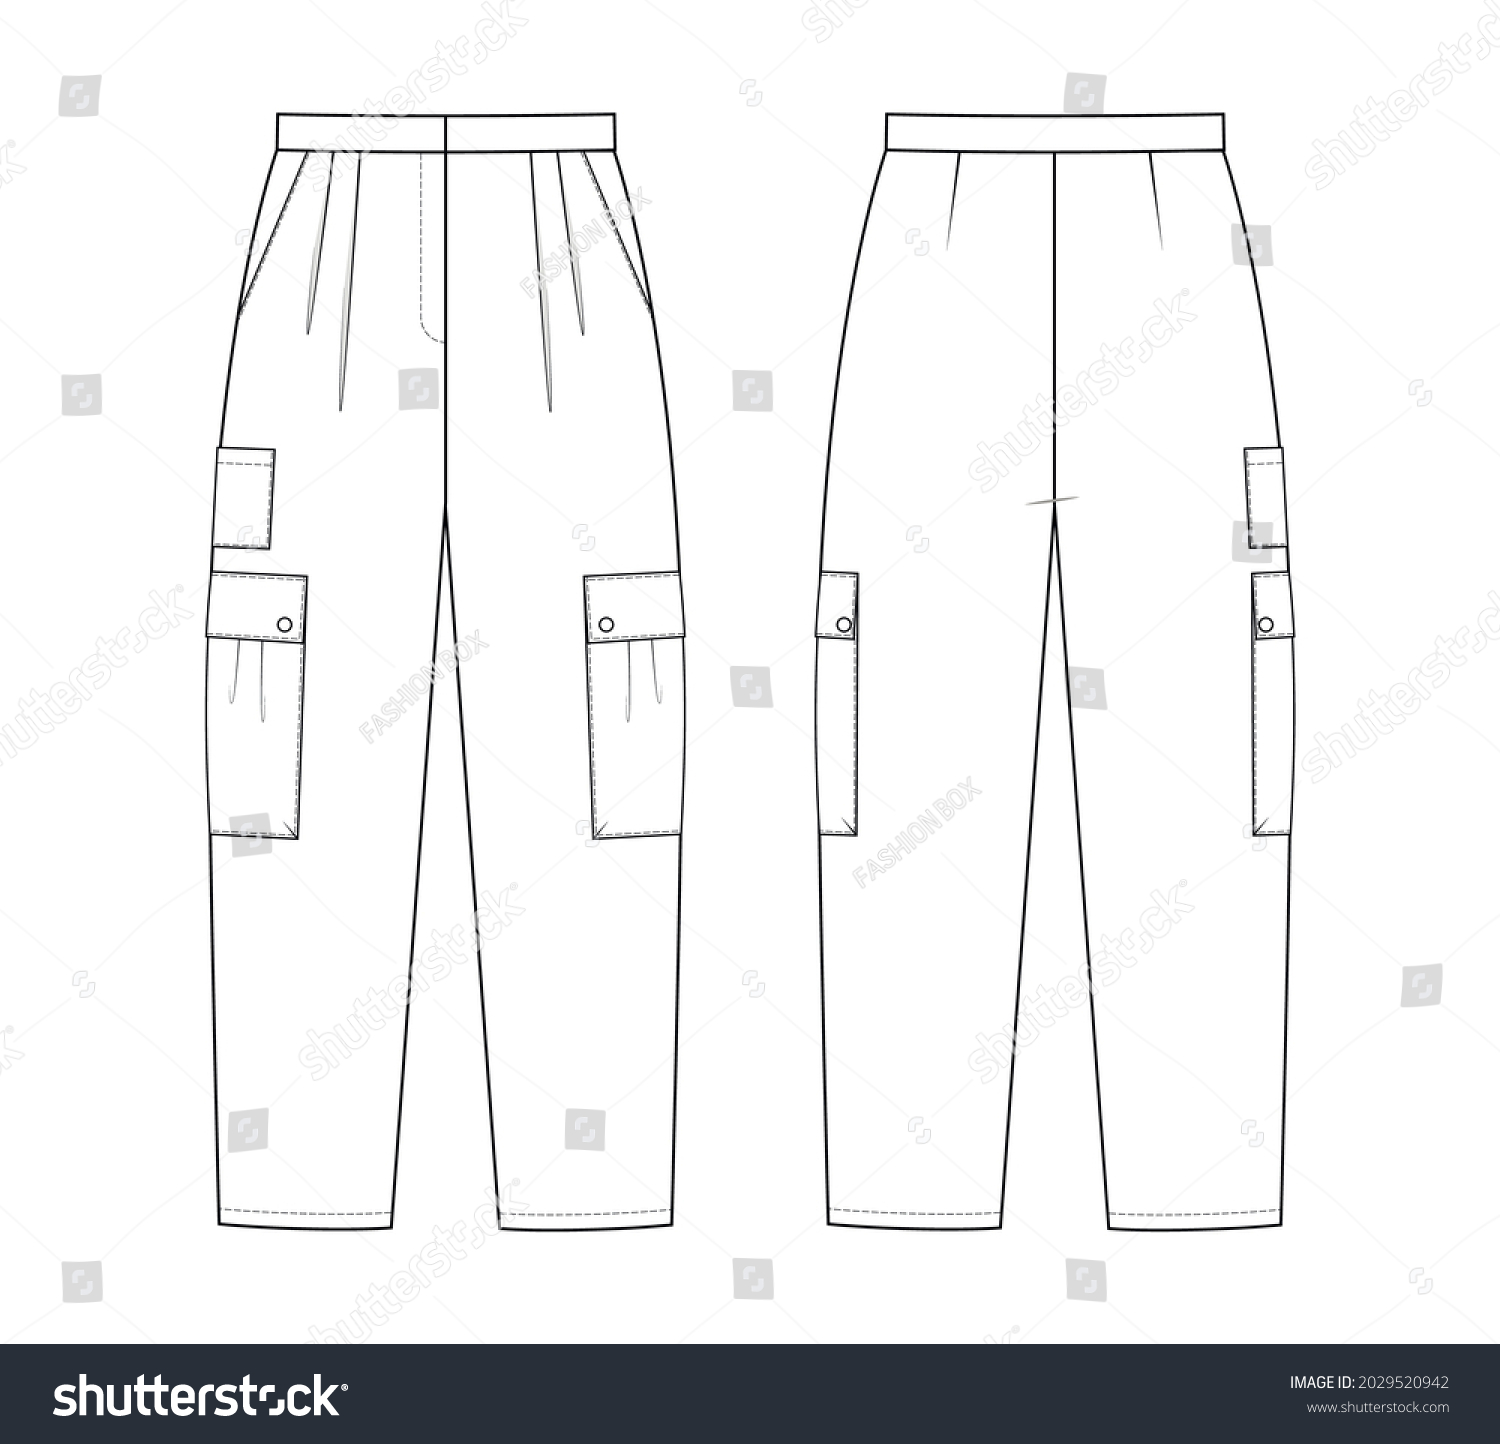 33 Slouch trousers Images, Stock Photos & Vectors | Shutterstock